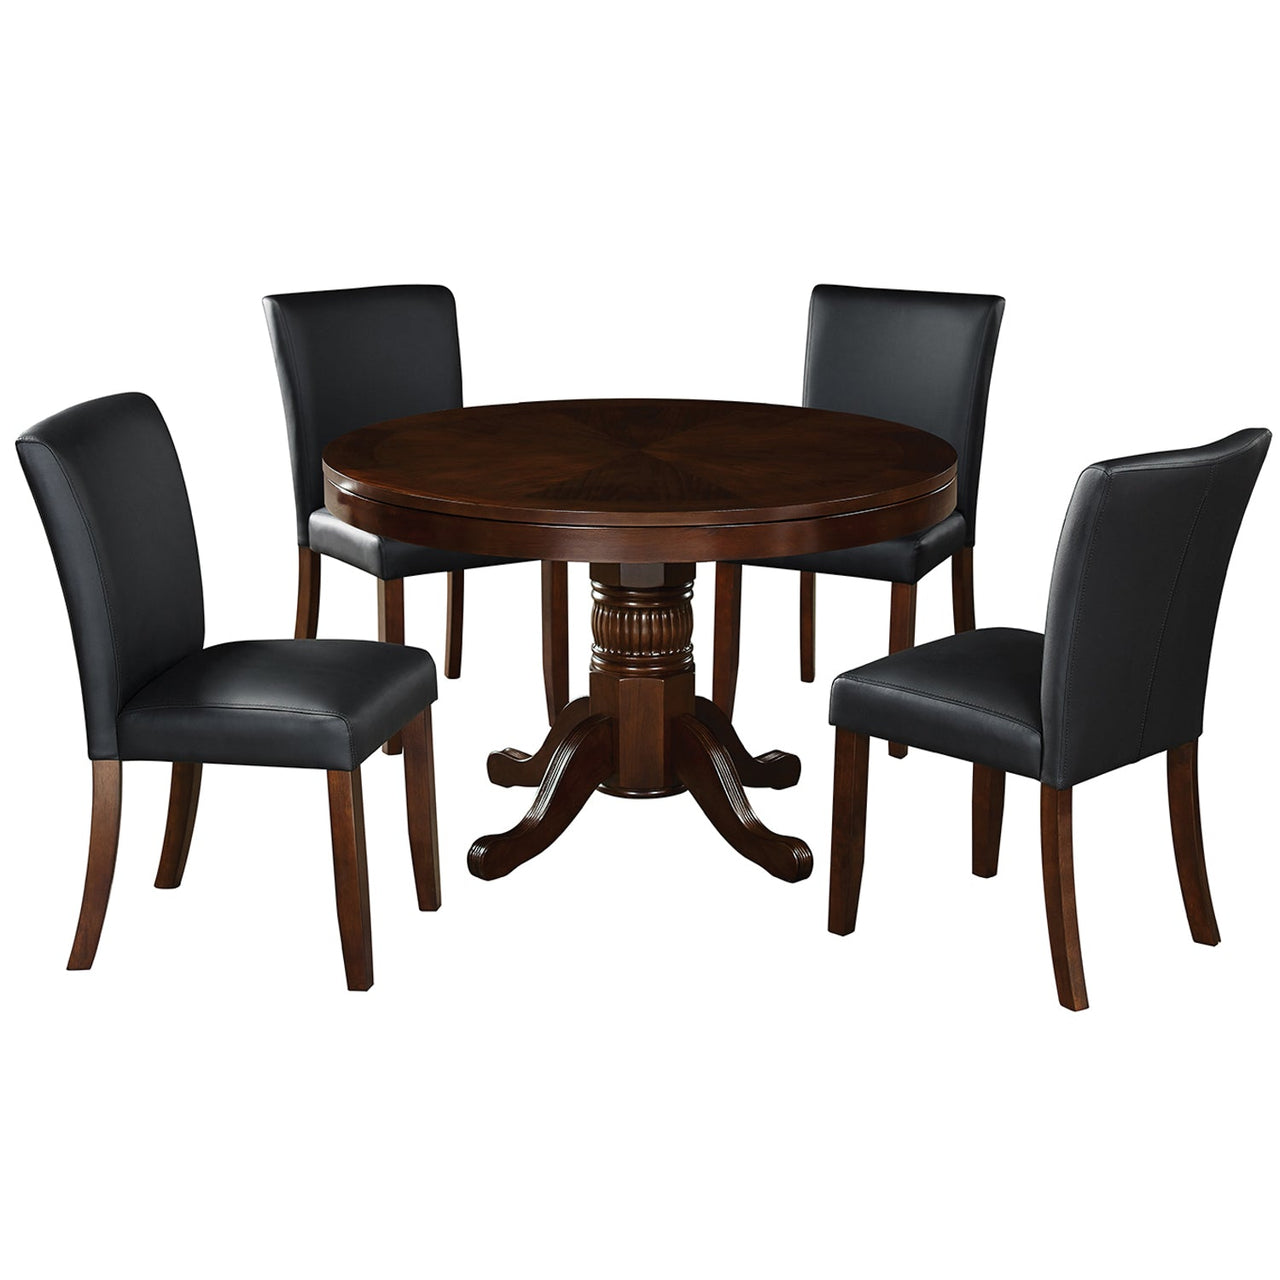 RAM Game Room Round Poker Table Set with Matching Wood Chairs-AMERICANA-POKER-TABLES